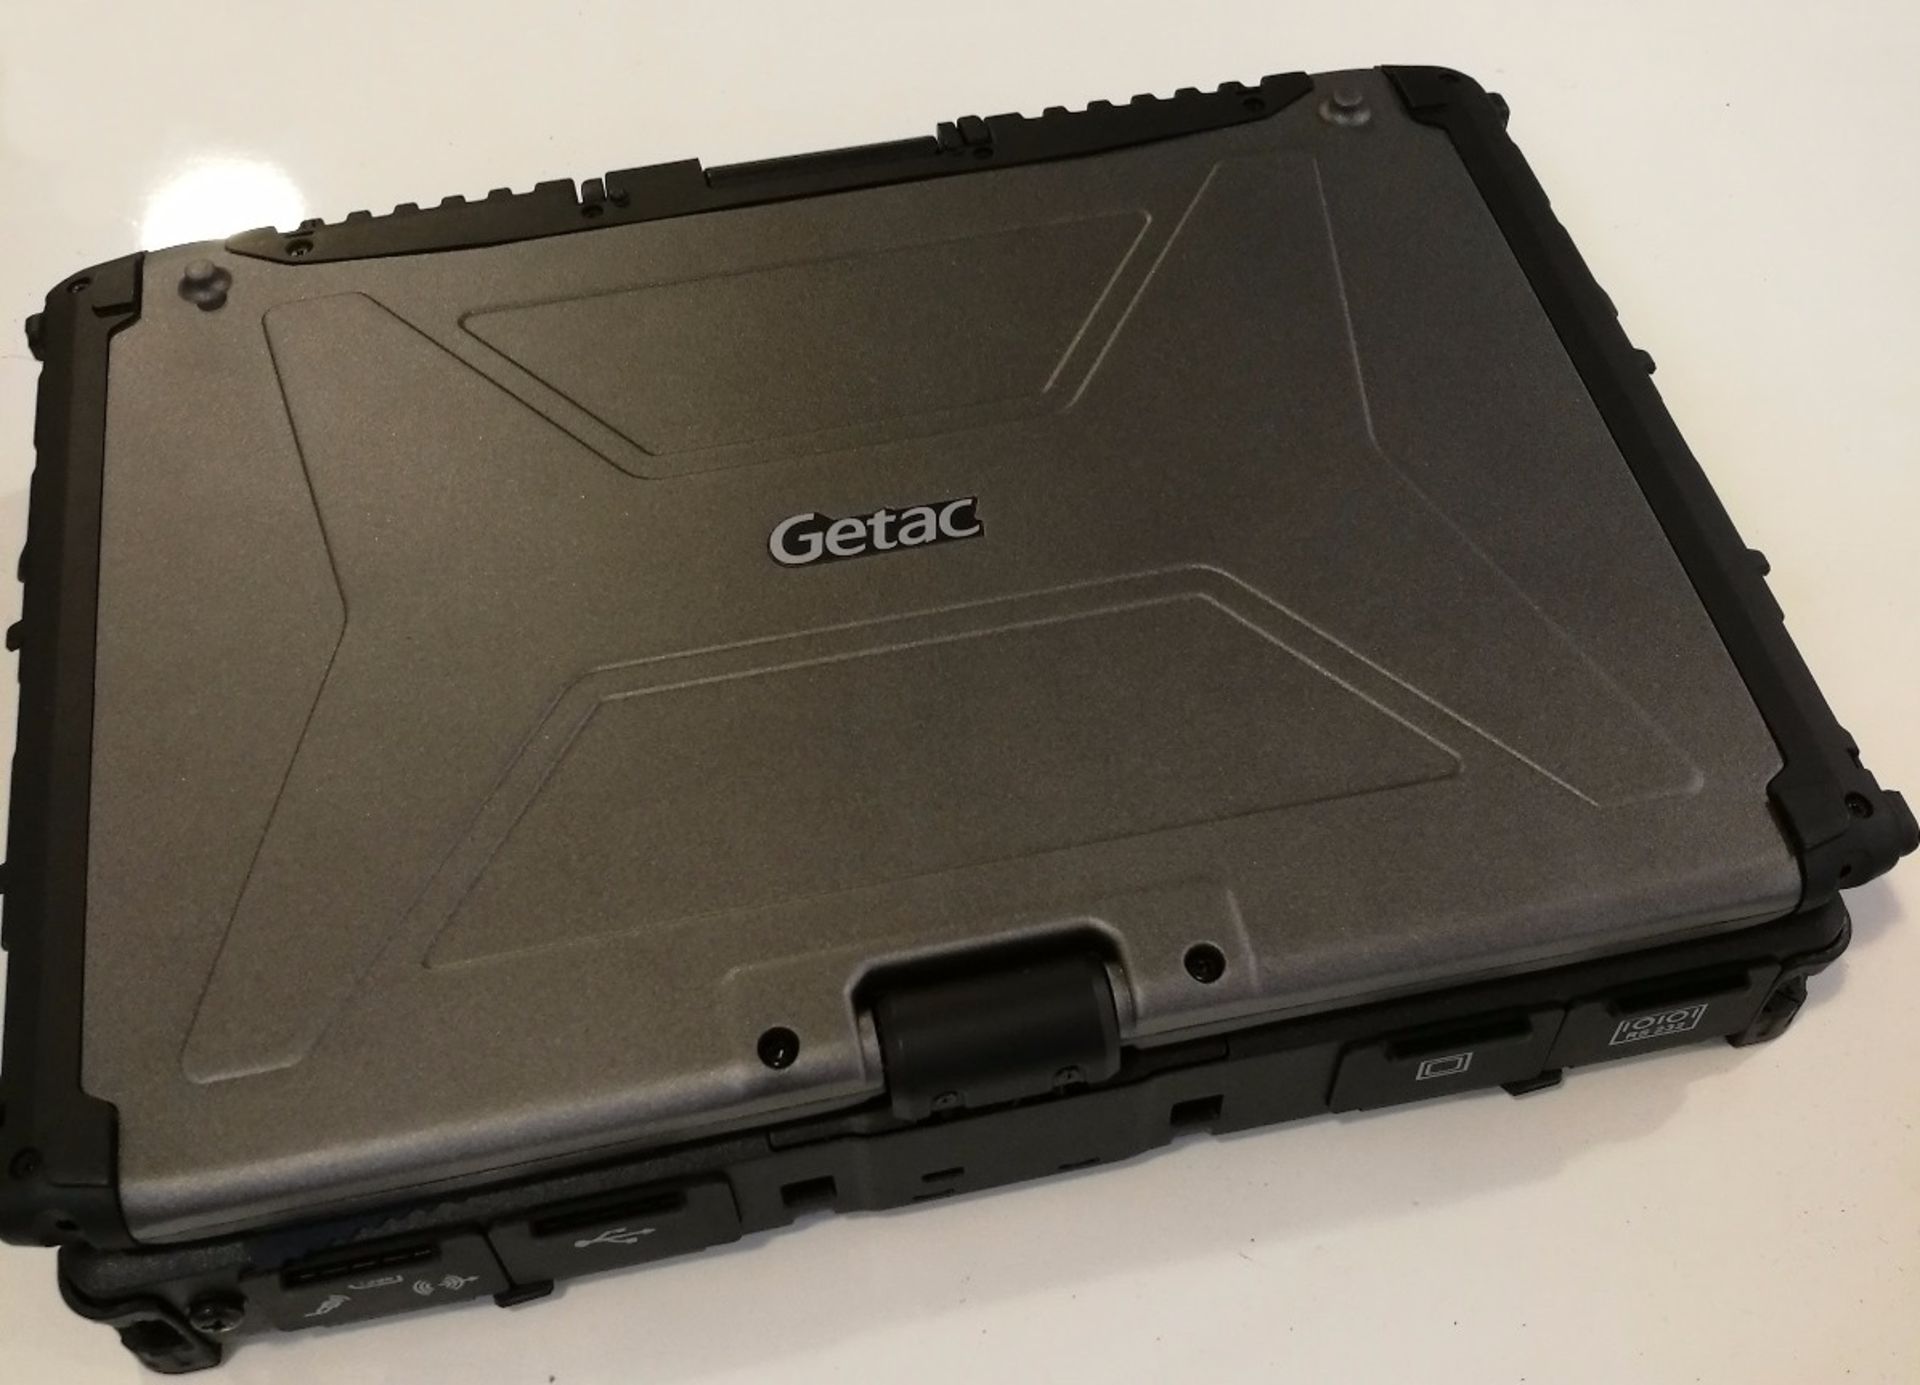 1 x Getac V200 Rugged Laptop Computer - Rugged Laptop That Transforms into a Tablet PC - Features an - Image 9 of 10